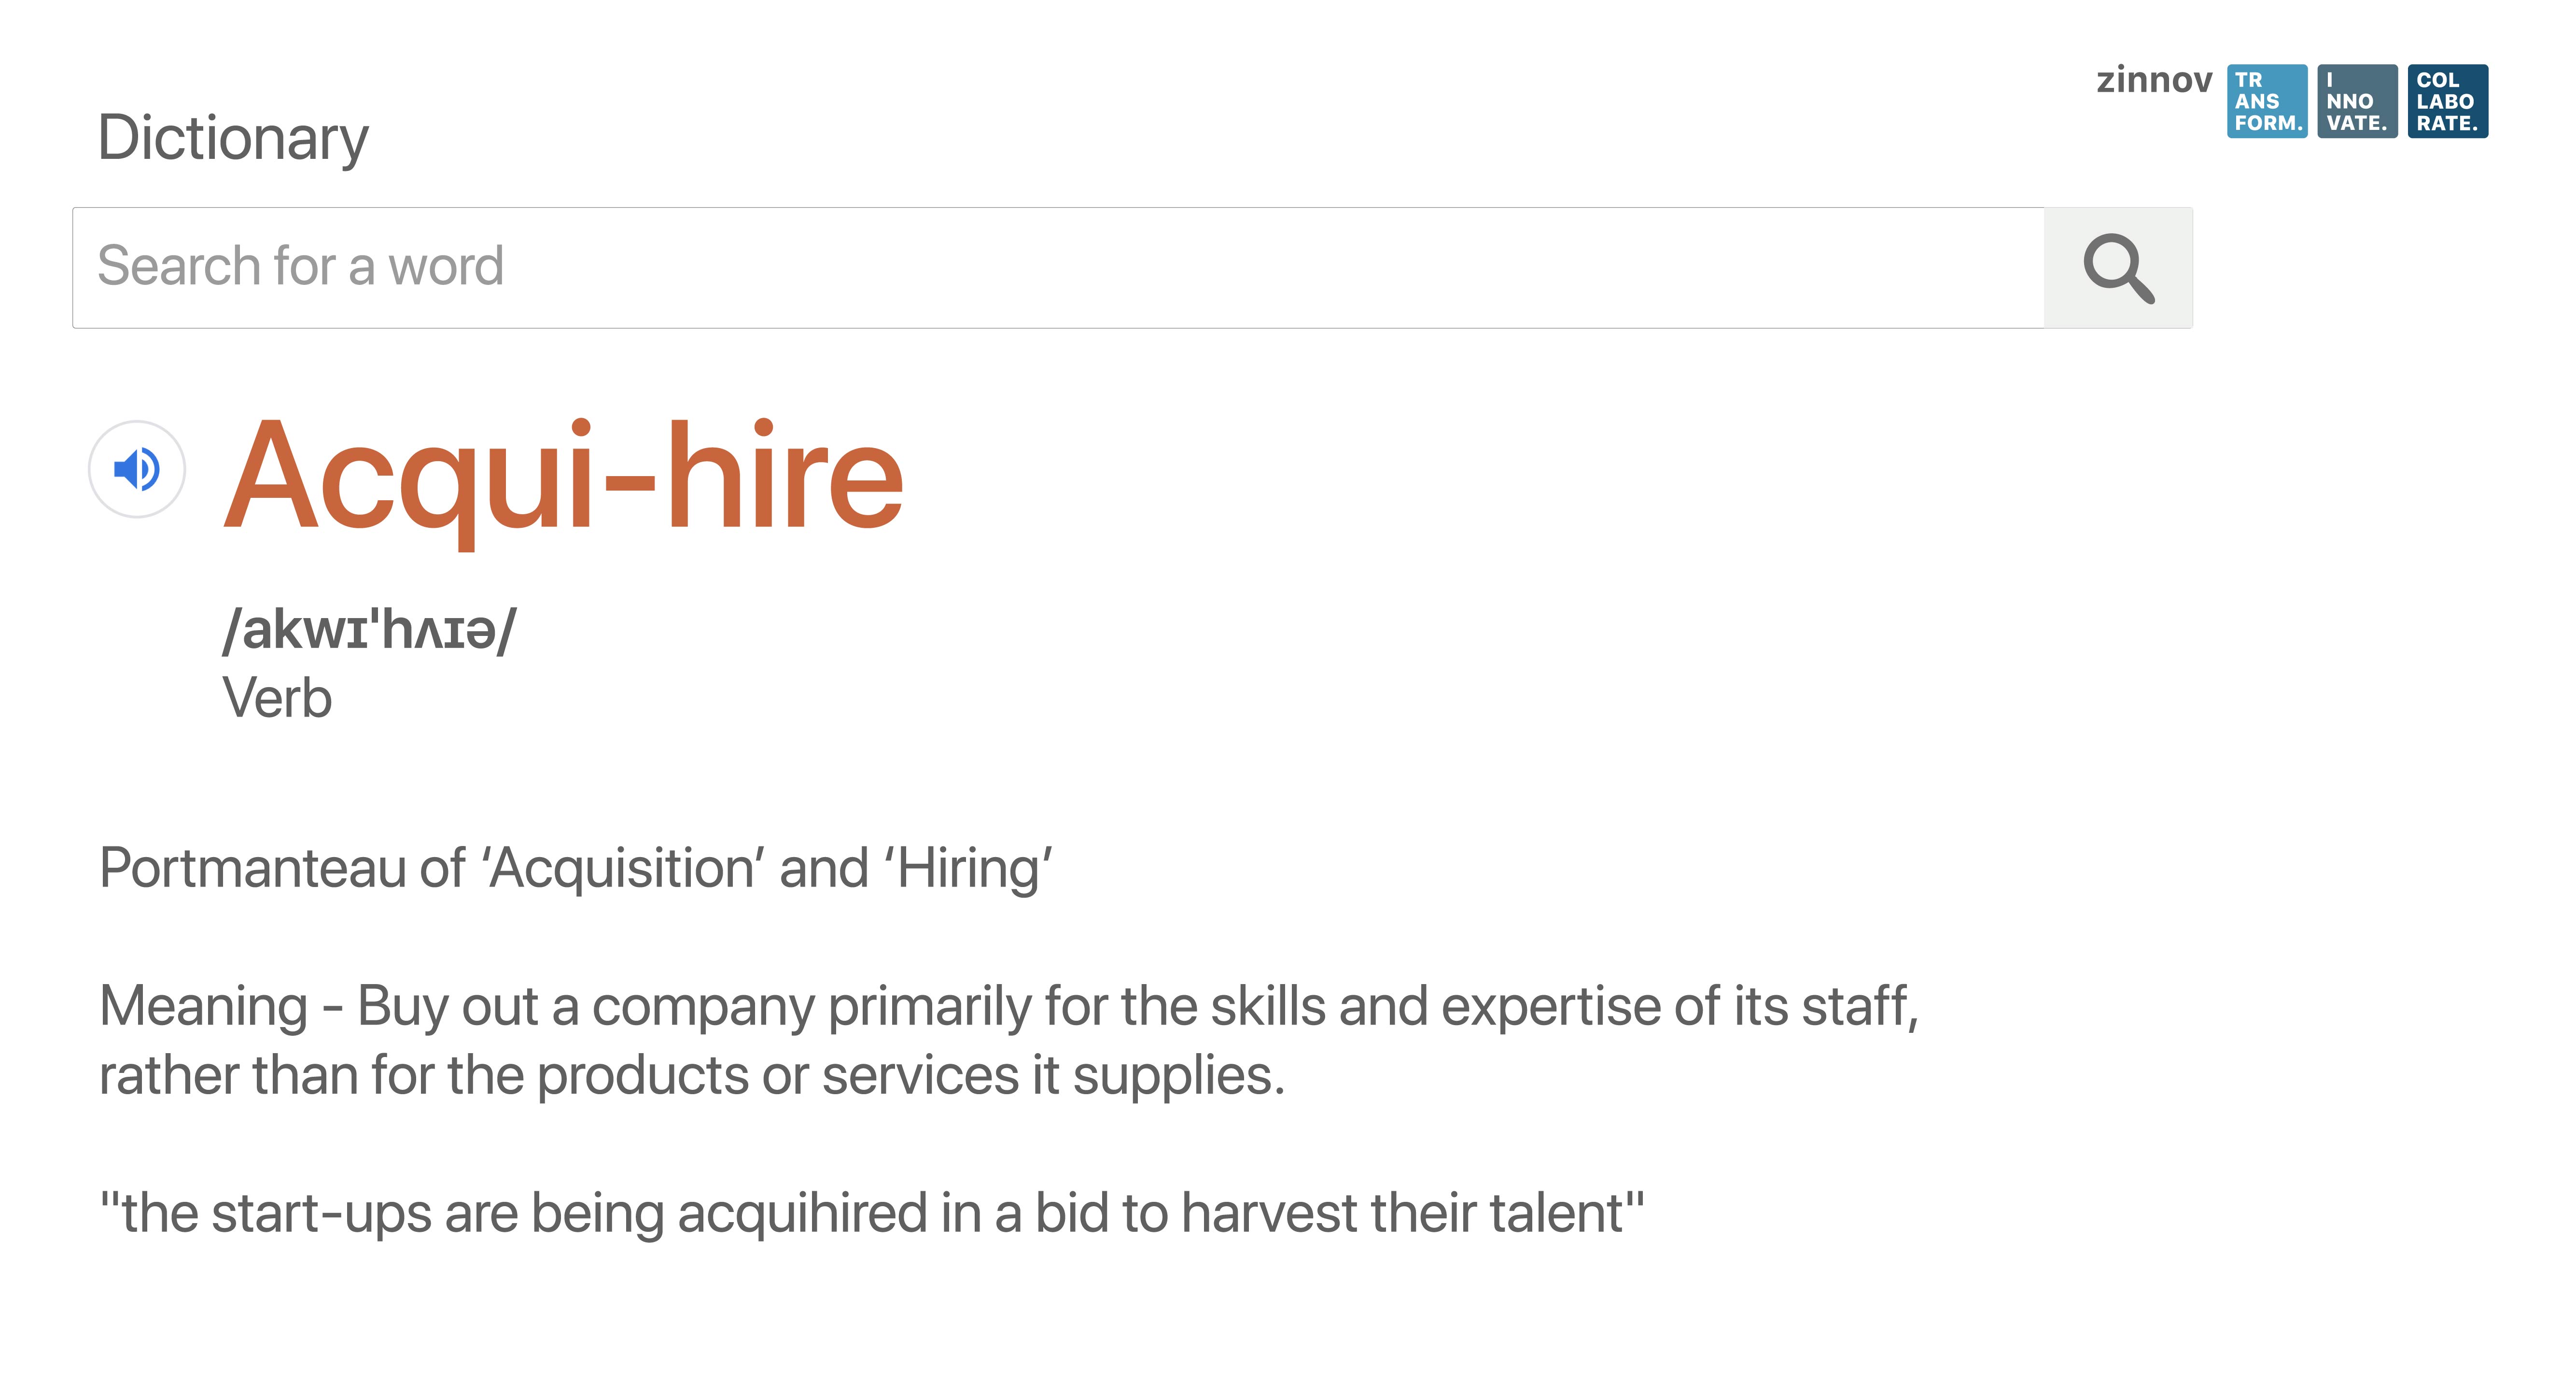 What is Acqui-hiring?